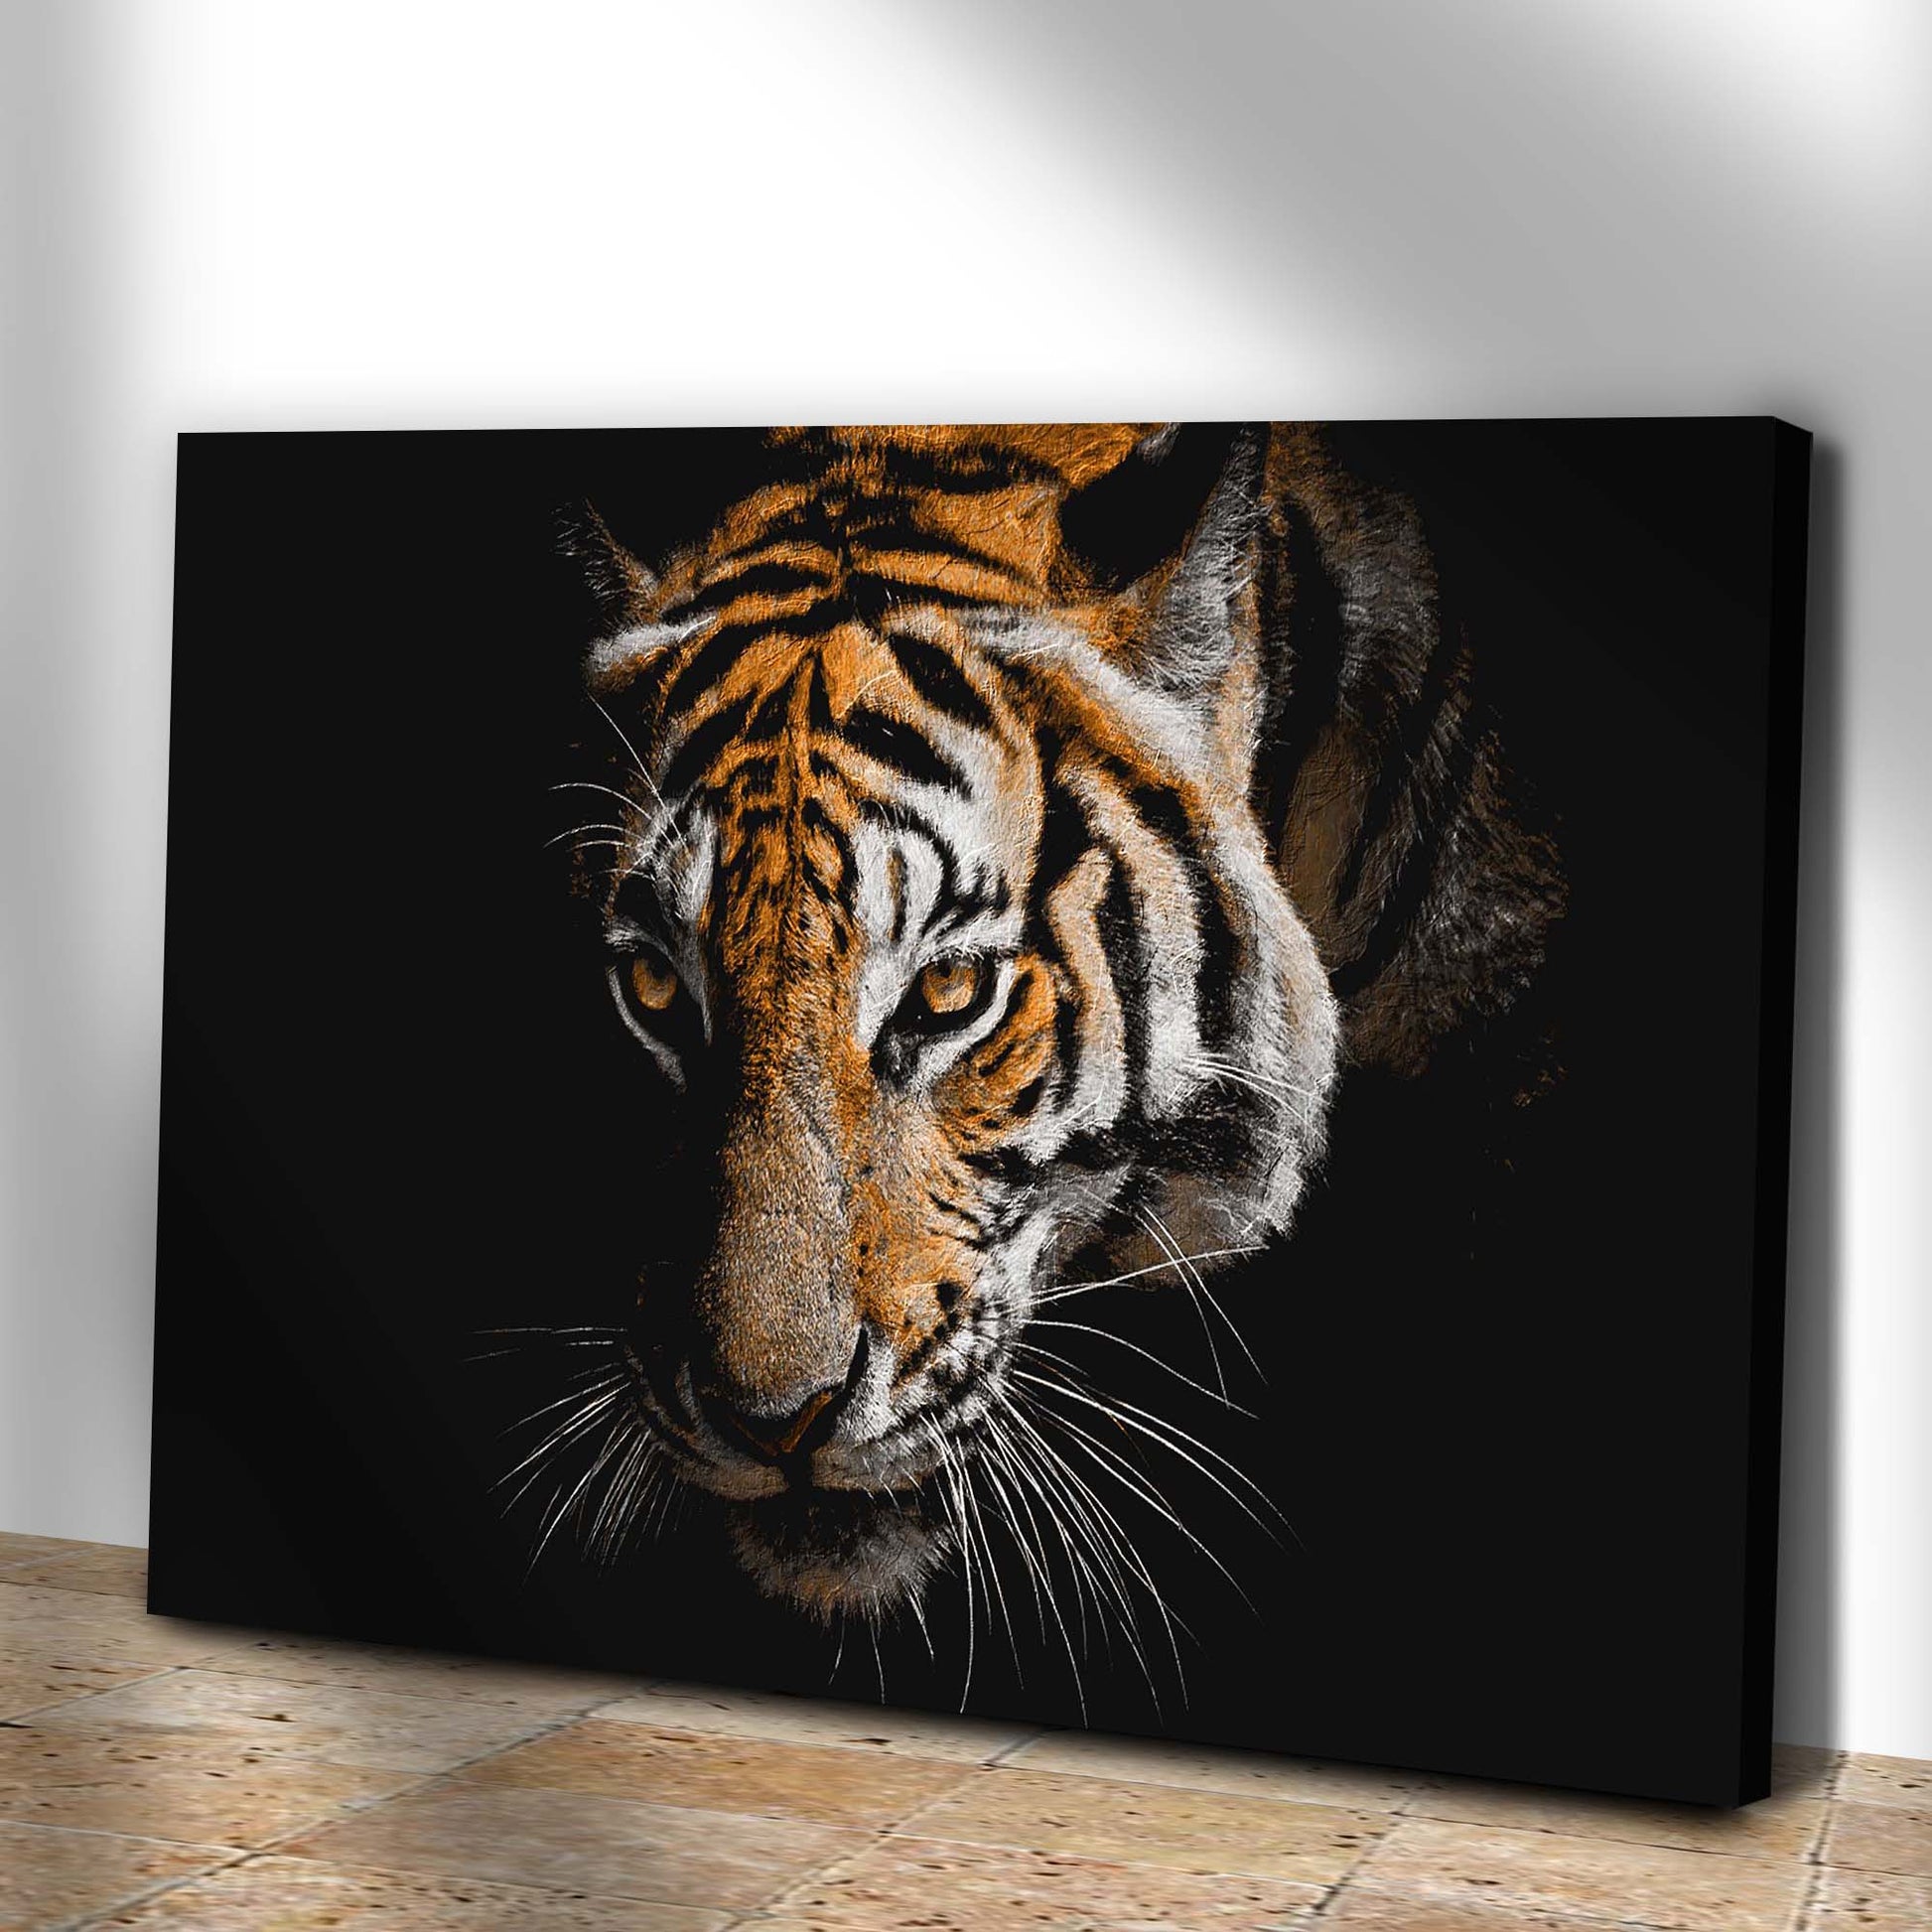 Tiger Watching In The Dark Canvas Wall Art Style 2 - Image by Tailored Canvases